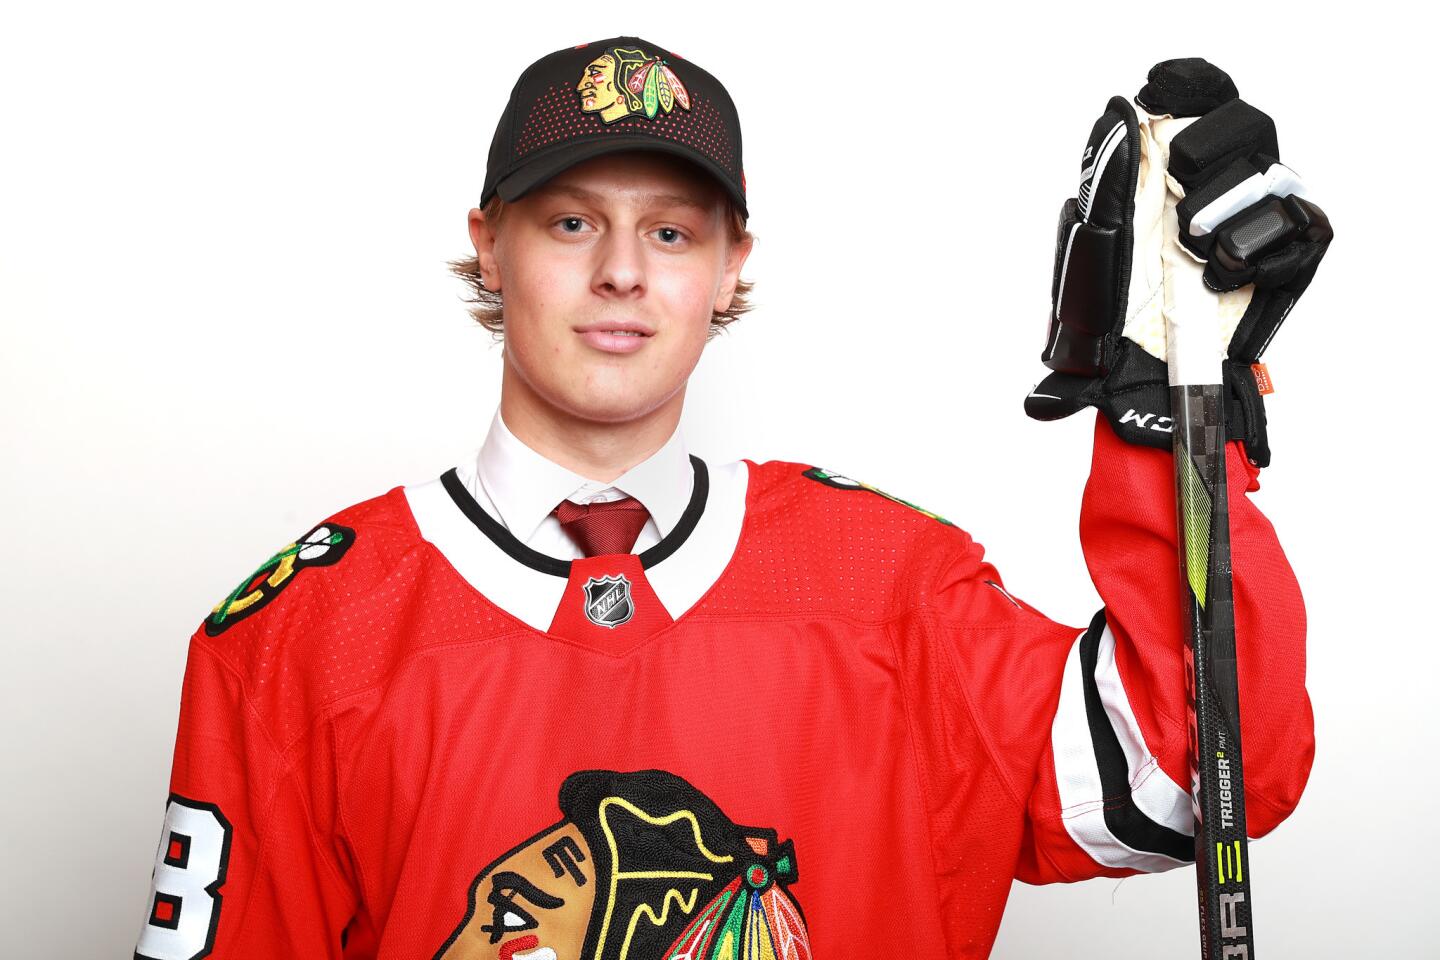 The Blackhawks selected defenseman Adam Boqvist with the No. 8 pick in the 2018 draft.